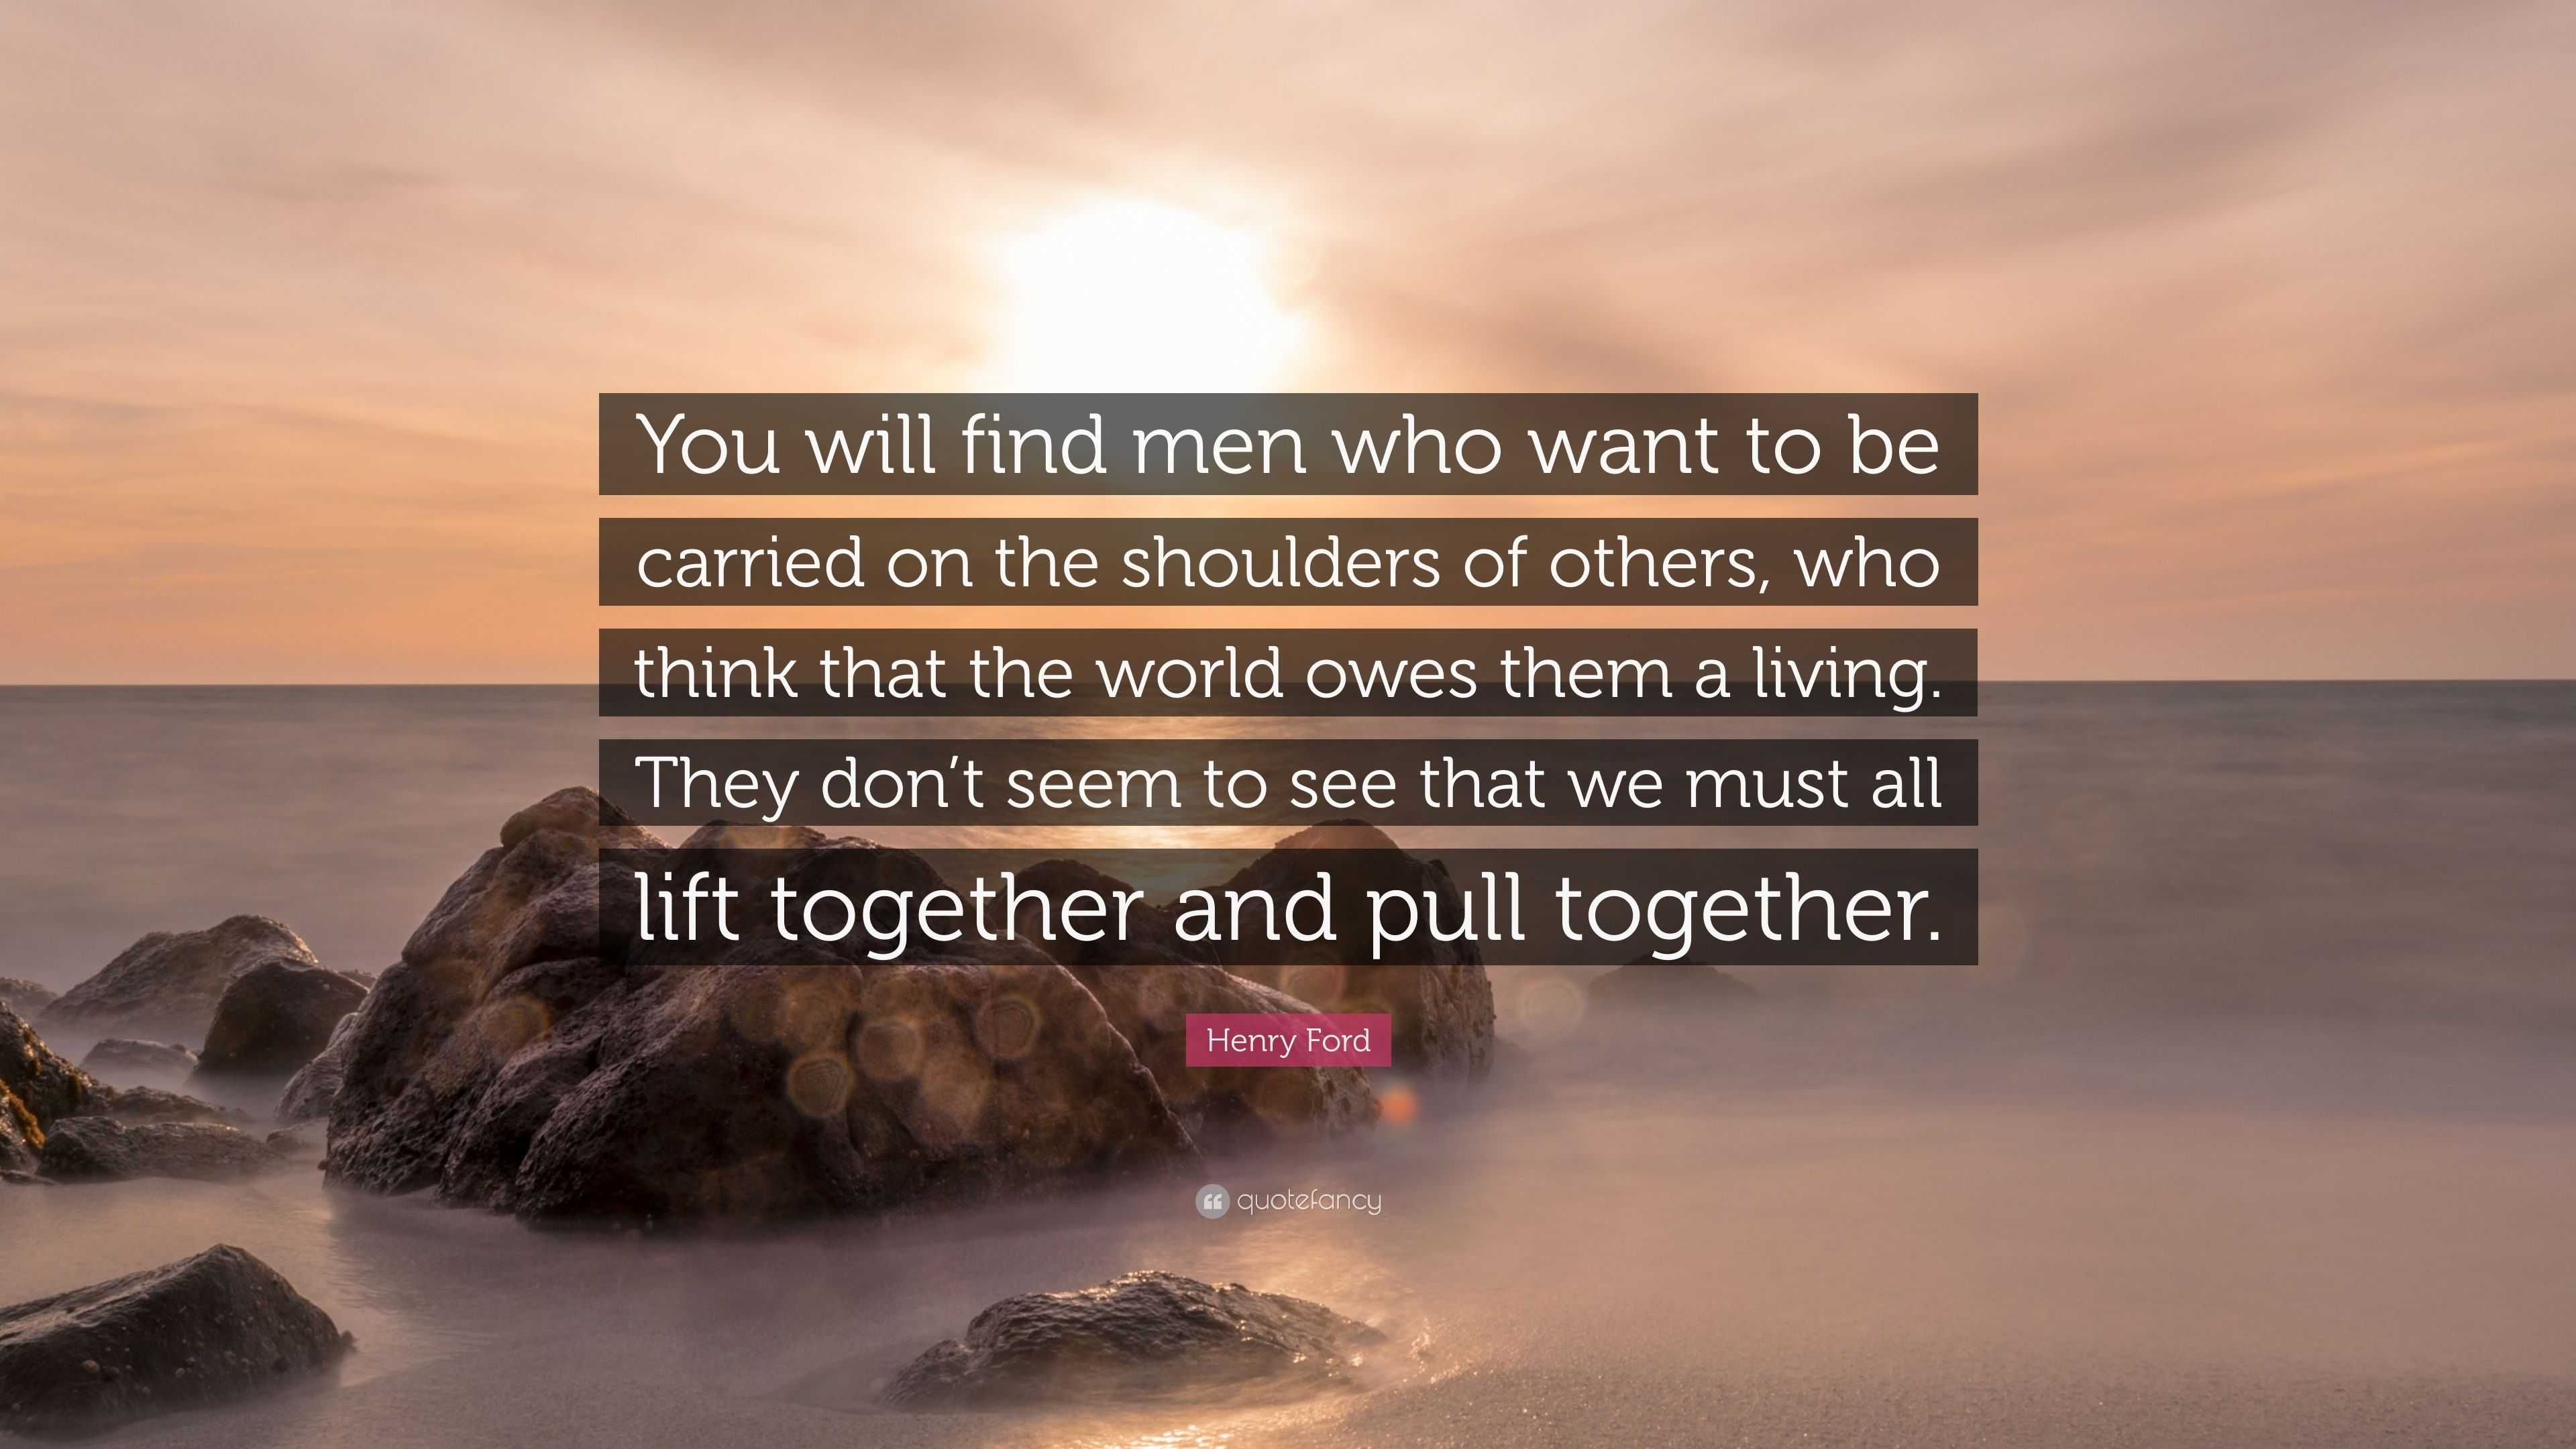 Henry Ford Quote: “You will find men who want to be carried on the ...